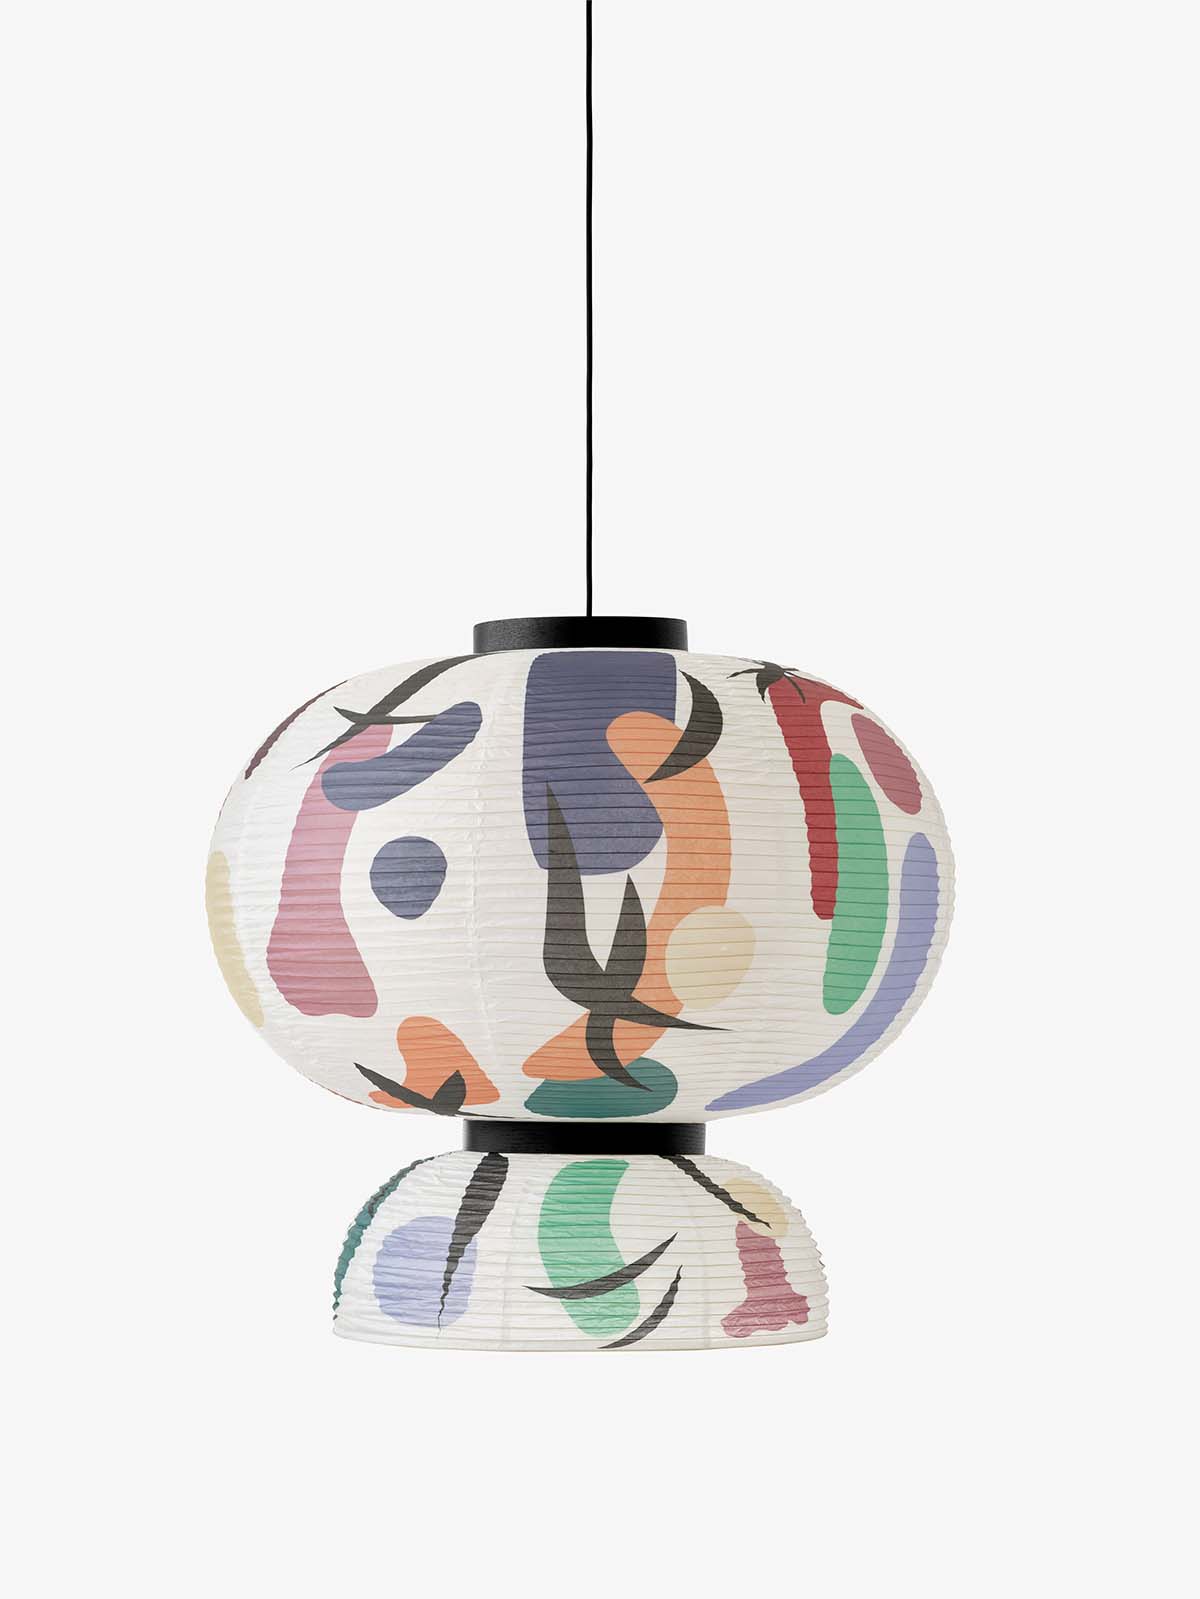 Colour, shape and form are the key elements of this lamp shade - usable in any room to add some interest.